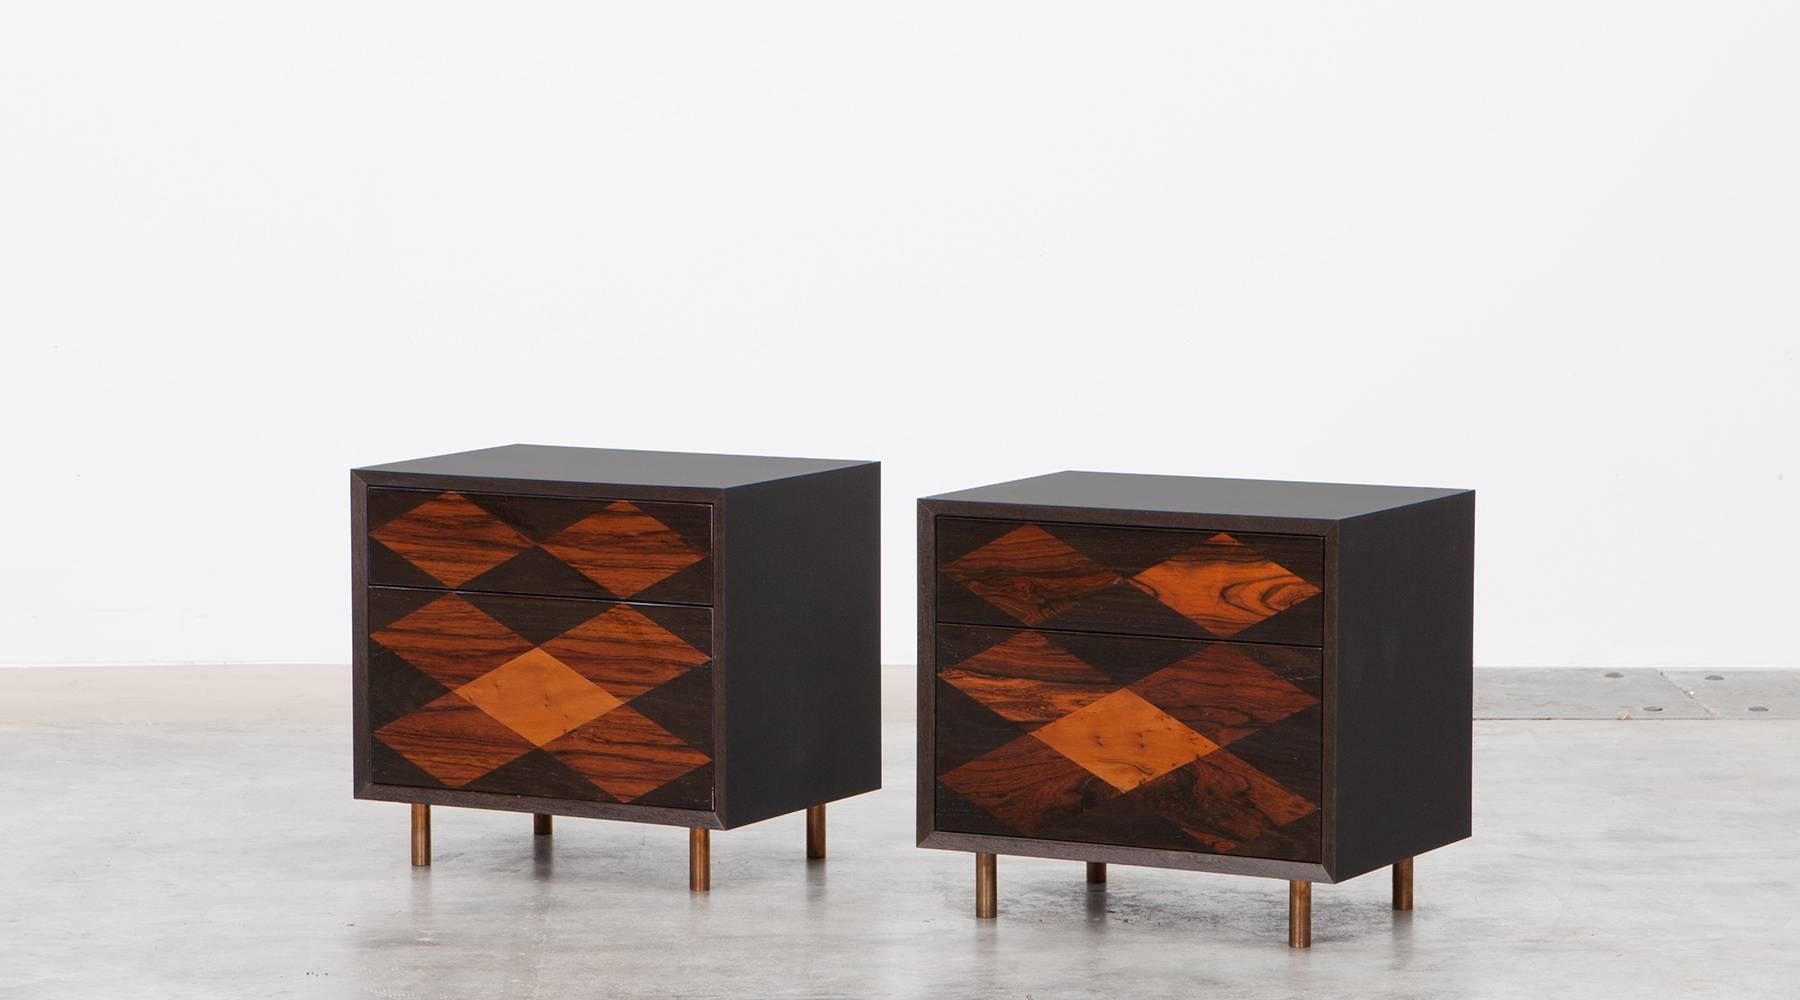 Pair of nightstands by contemporary German artist Johannes Hock, veneered drawer tops in diamond pattern, 30 types of wood. Each case contains two drawers, one bigger and one smaller and stands on bronze feet. Matching cabinet with same pattern